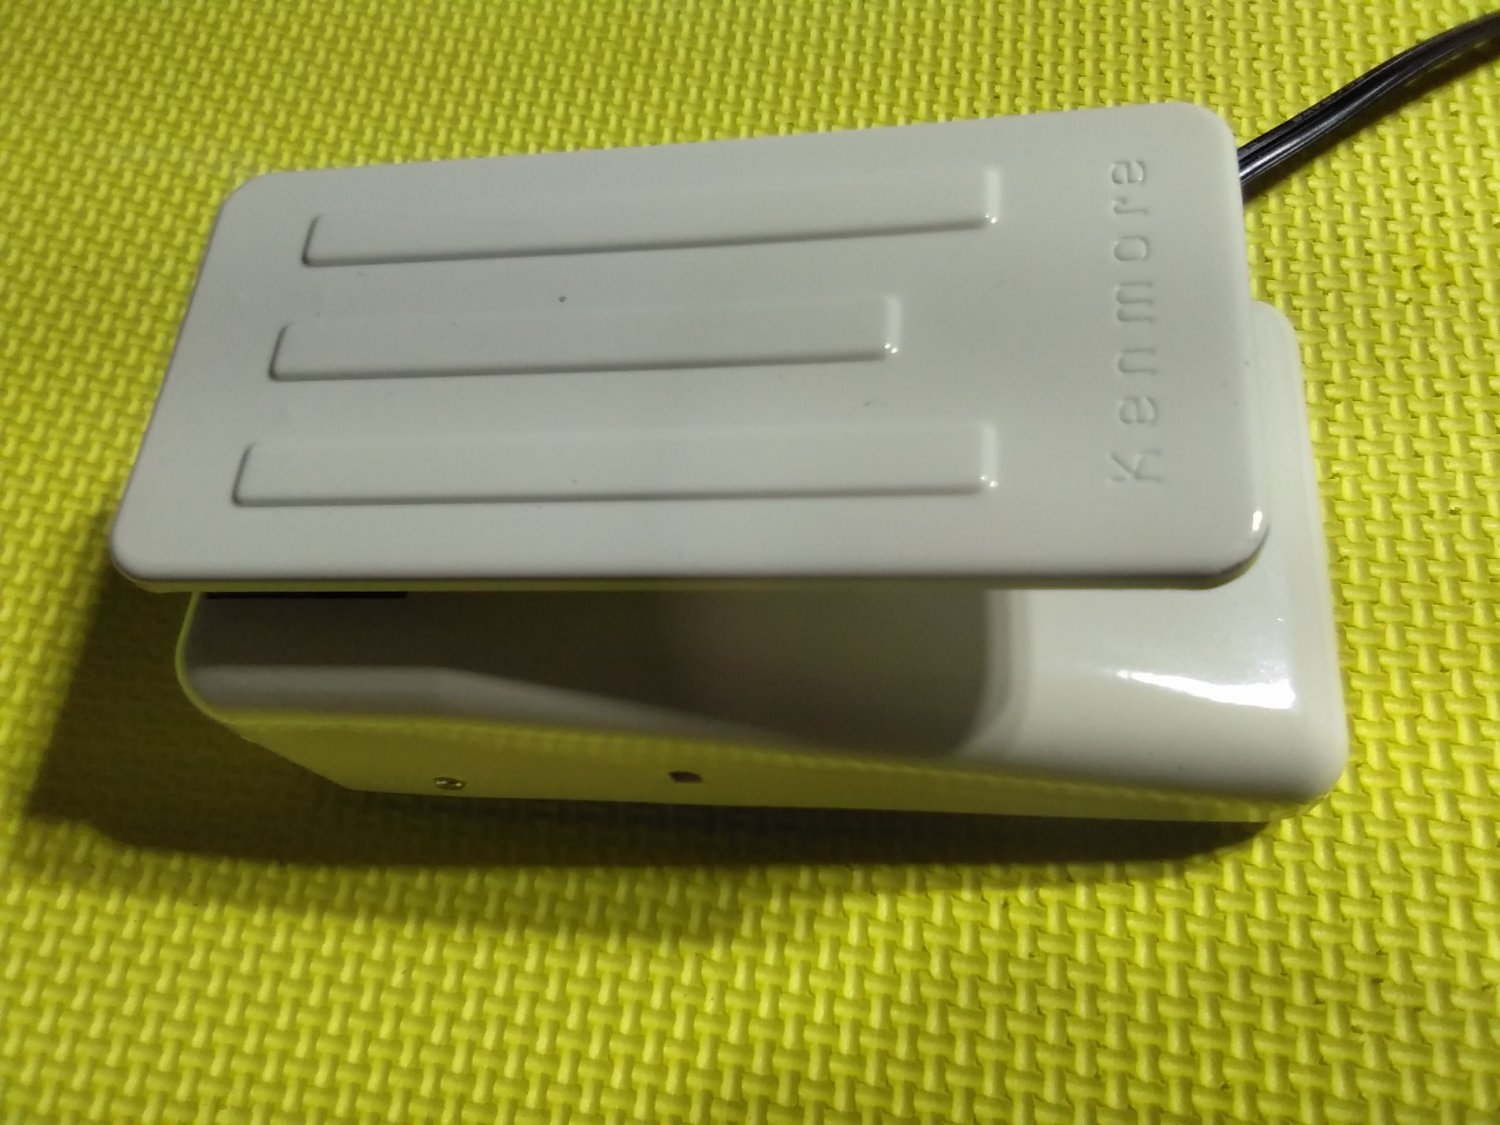 Sears Kenmore Model 6812 Sewing Machine Foot Control Pedal Like new.